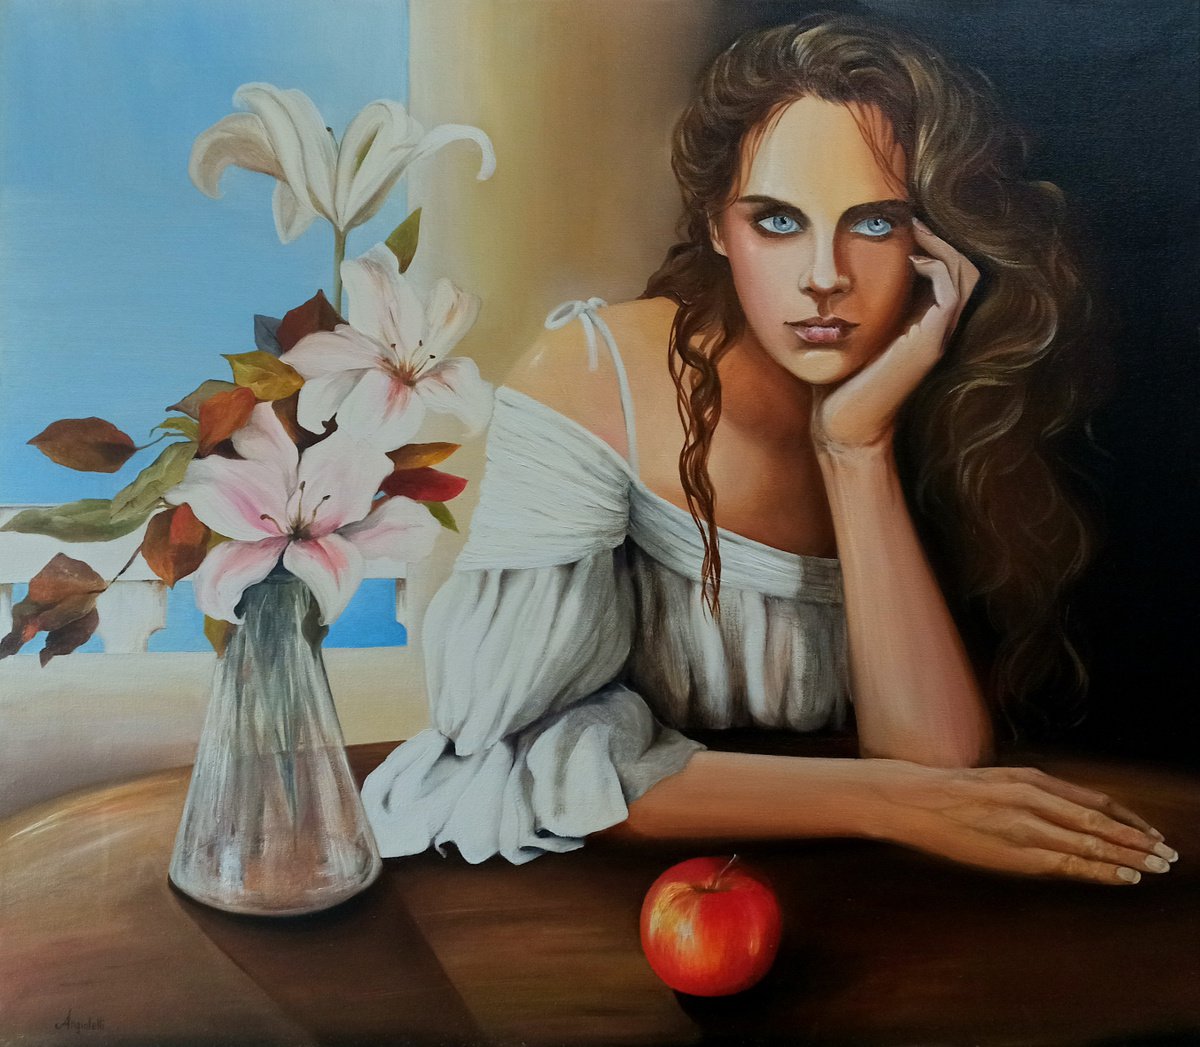 Distant thoughts - woman portrait - oil painting by Anna Rita Angiolelli